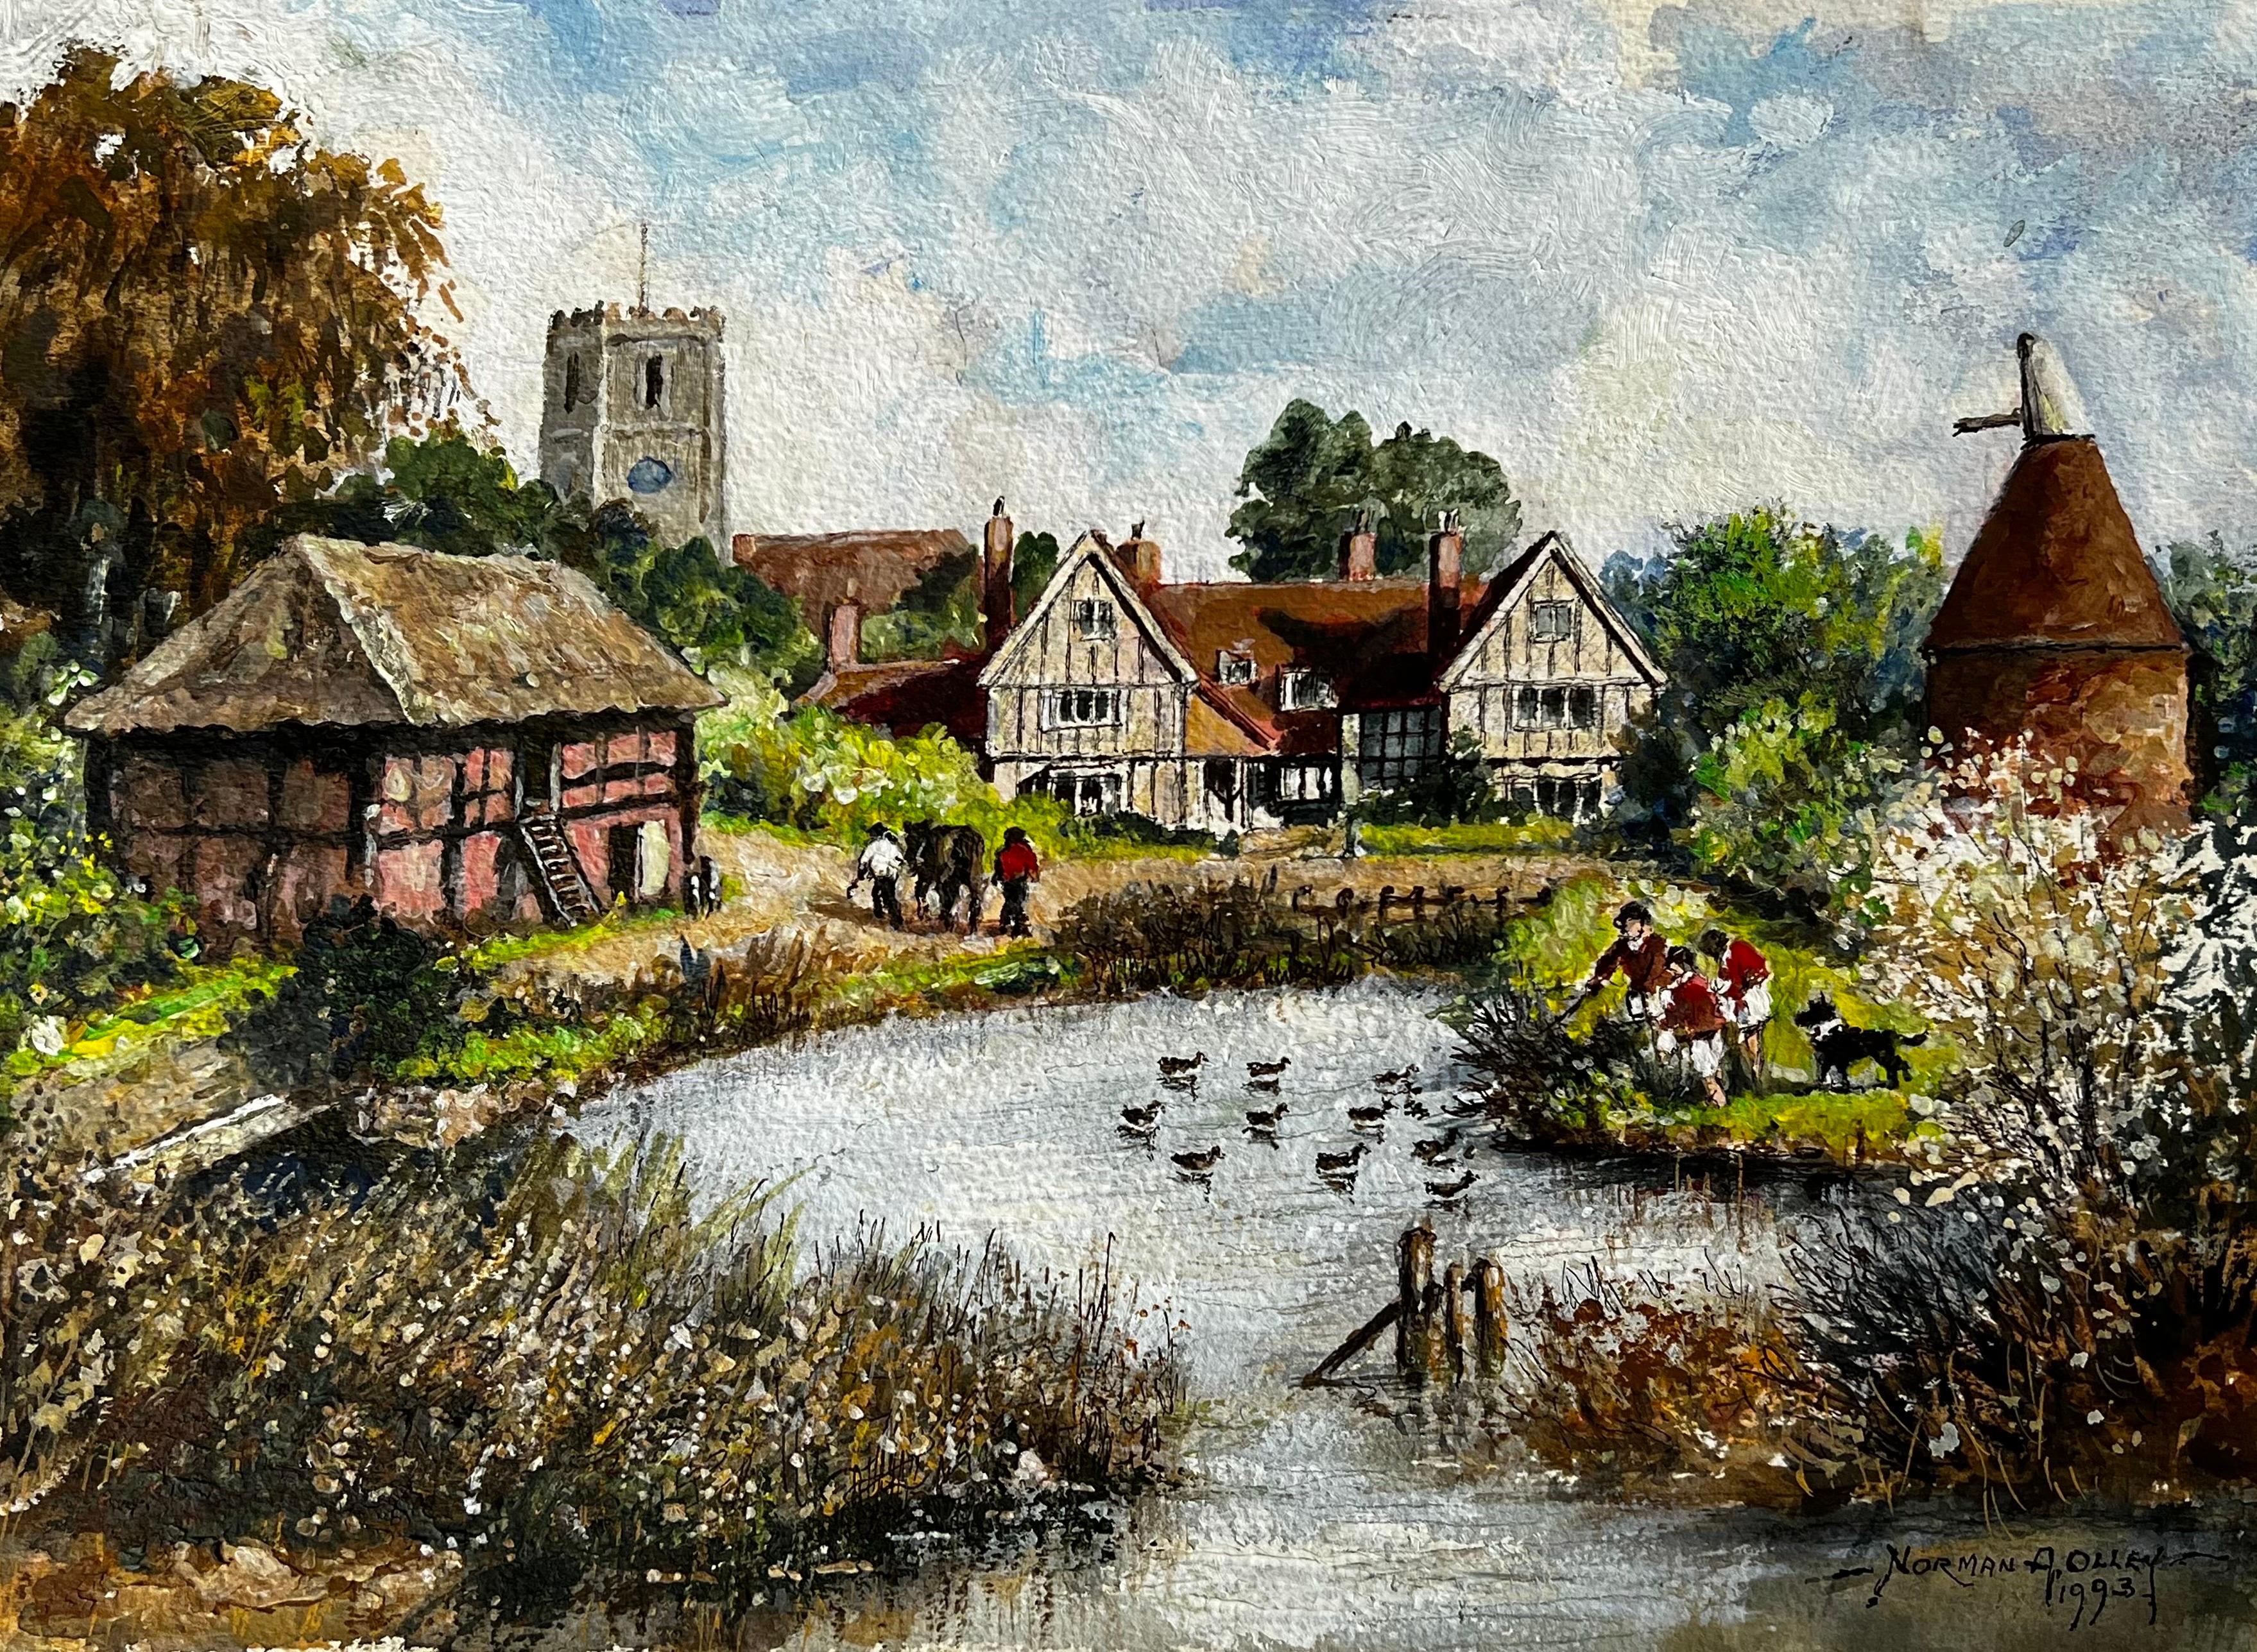 Norman A Olley Landscape Painting - The Huntsman Feeding The Ducks In A Peaceful Kentish Town Landscape